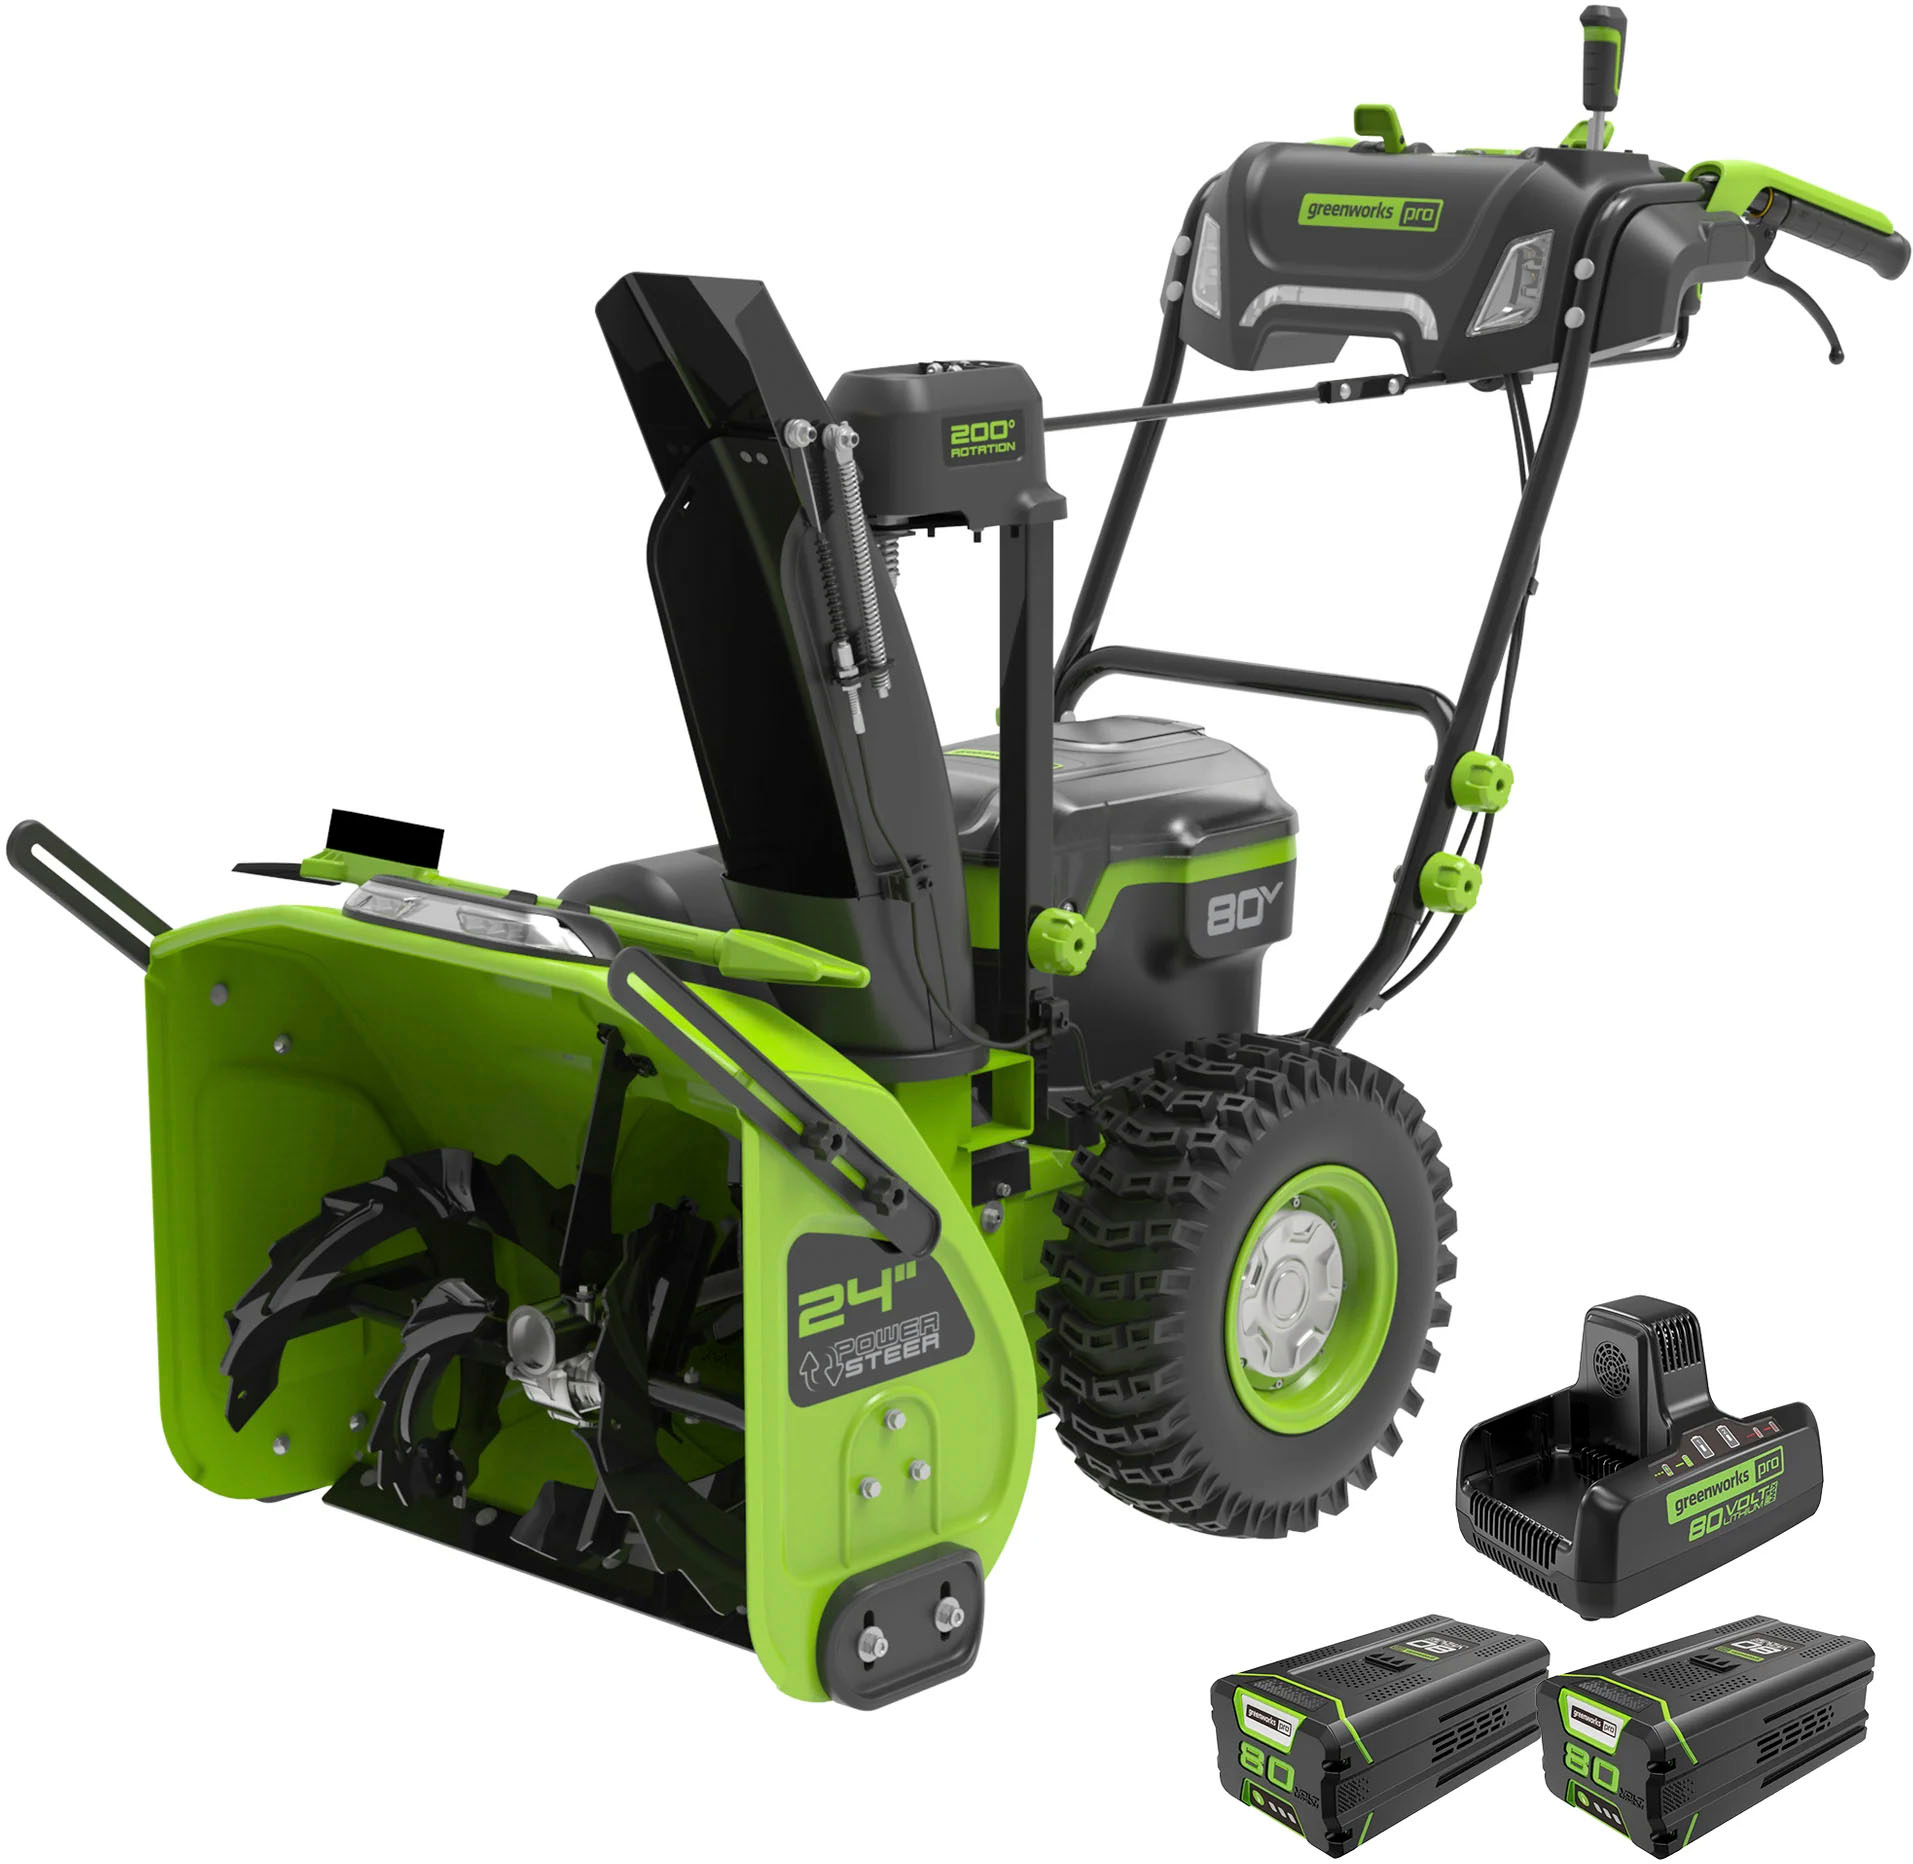 Angle View: Greenworks - Electric Pressure Washer up to 3000 PSI at 2.0 GPM Combo Kit with short gun, mitts, and 15" surface cleaner - Green